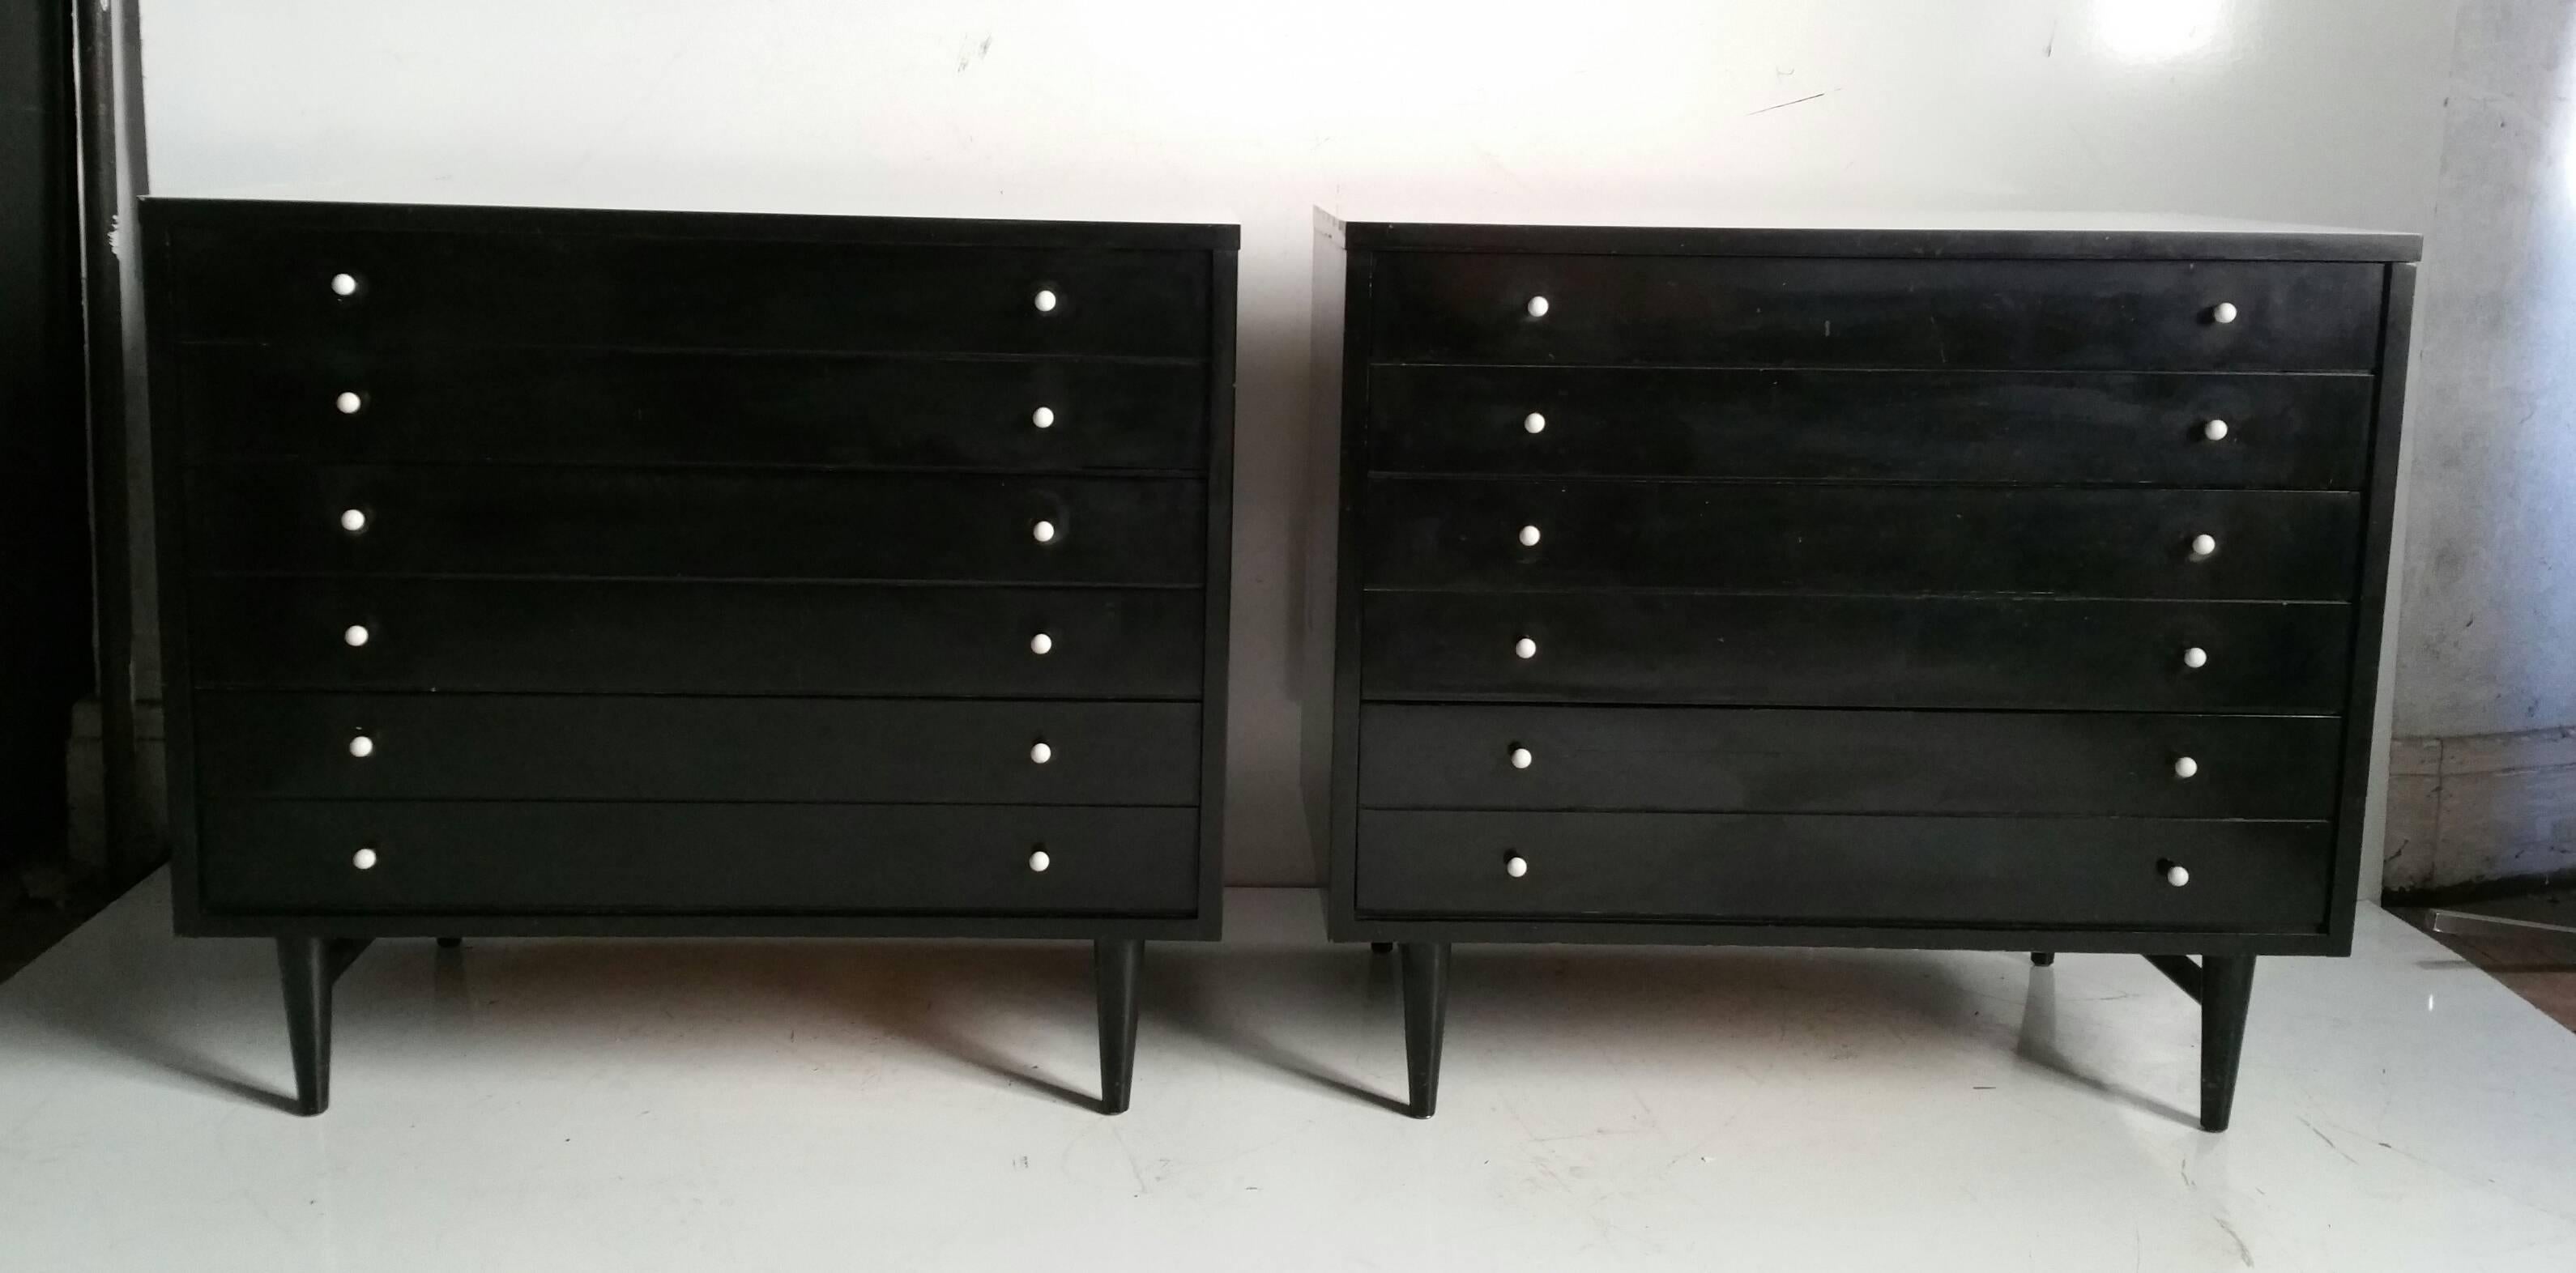 Lacquered Pair of Modernist Ebonized American of Martinsville Dressers